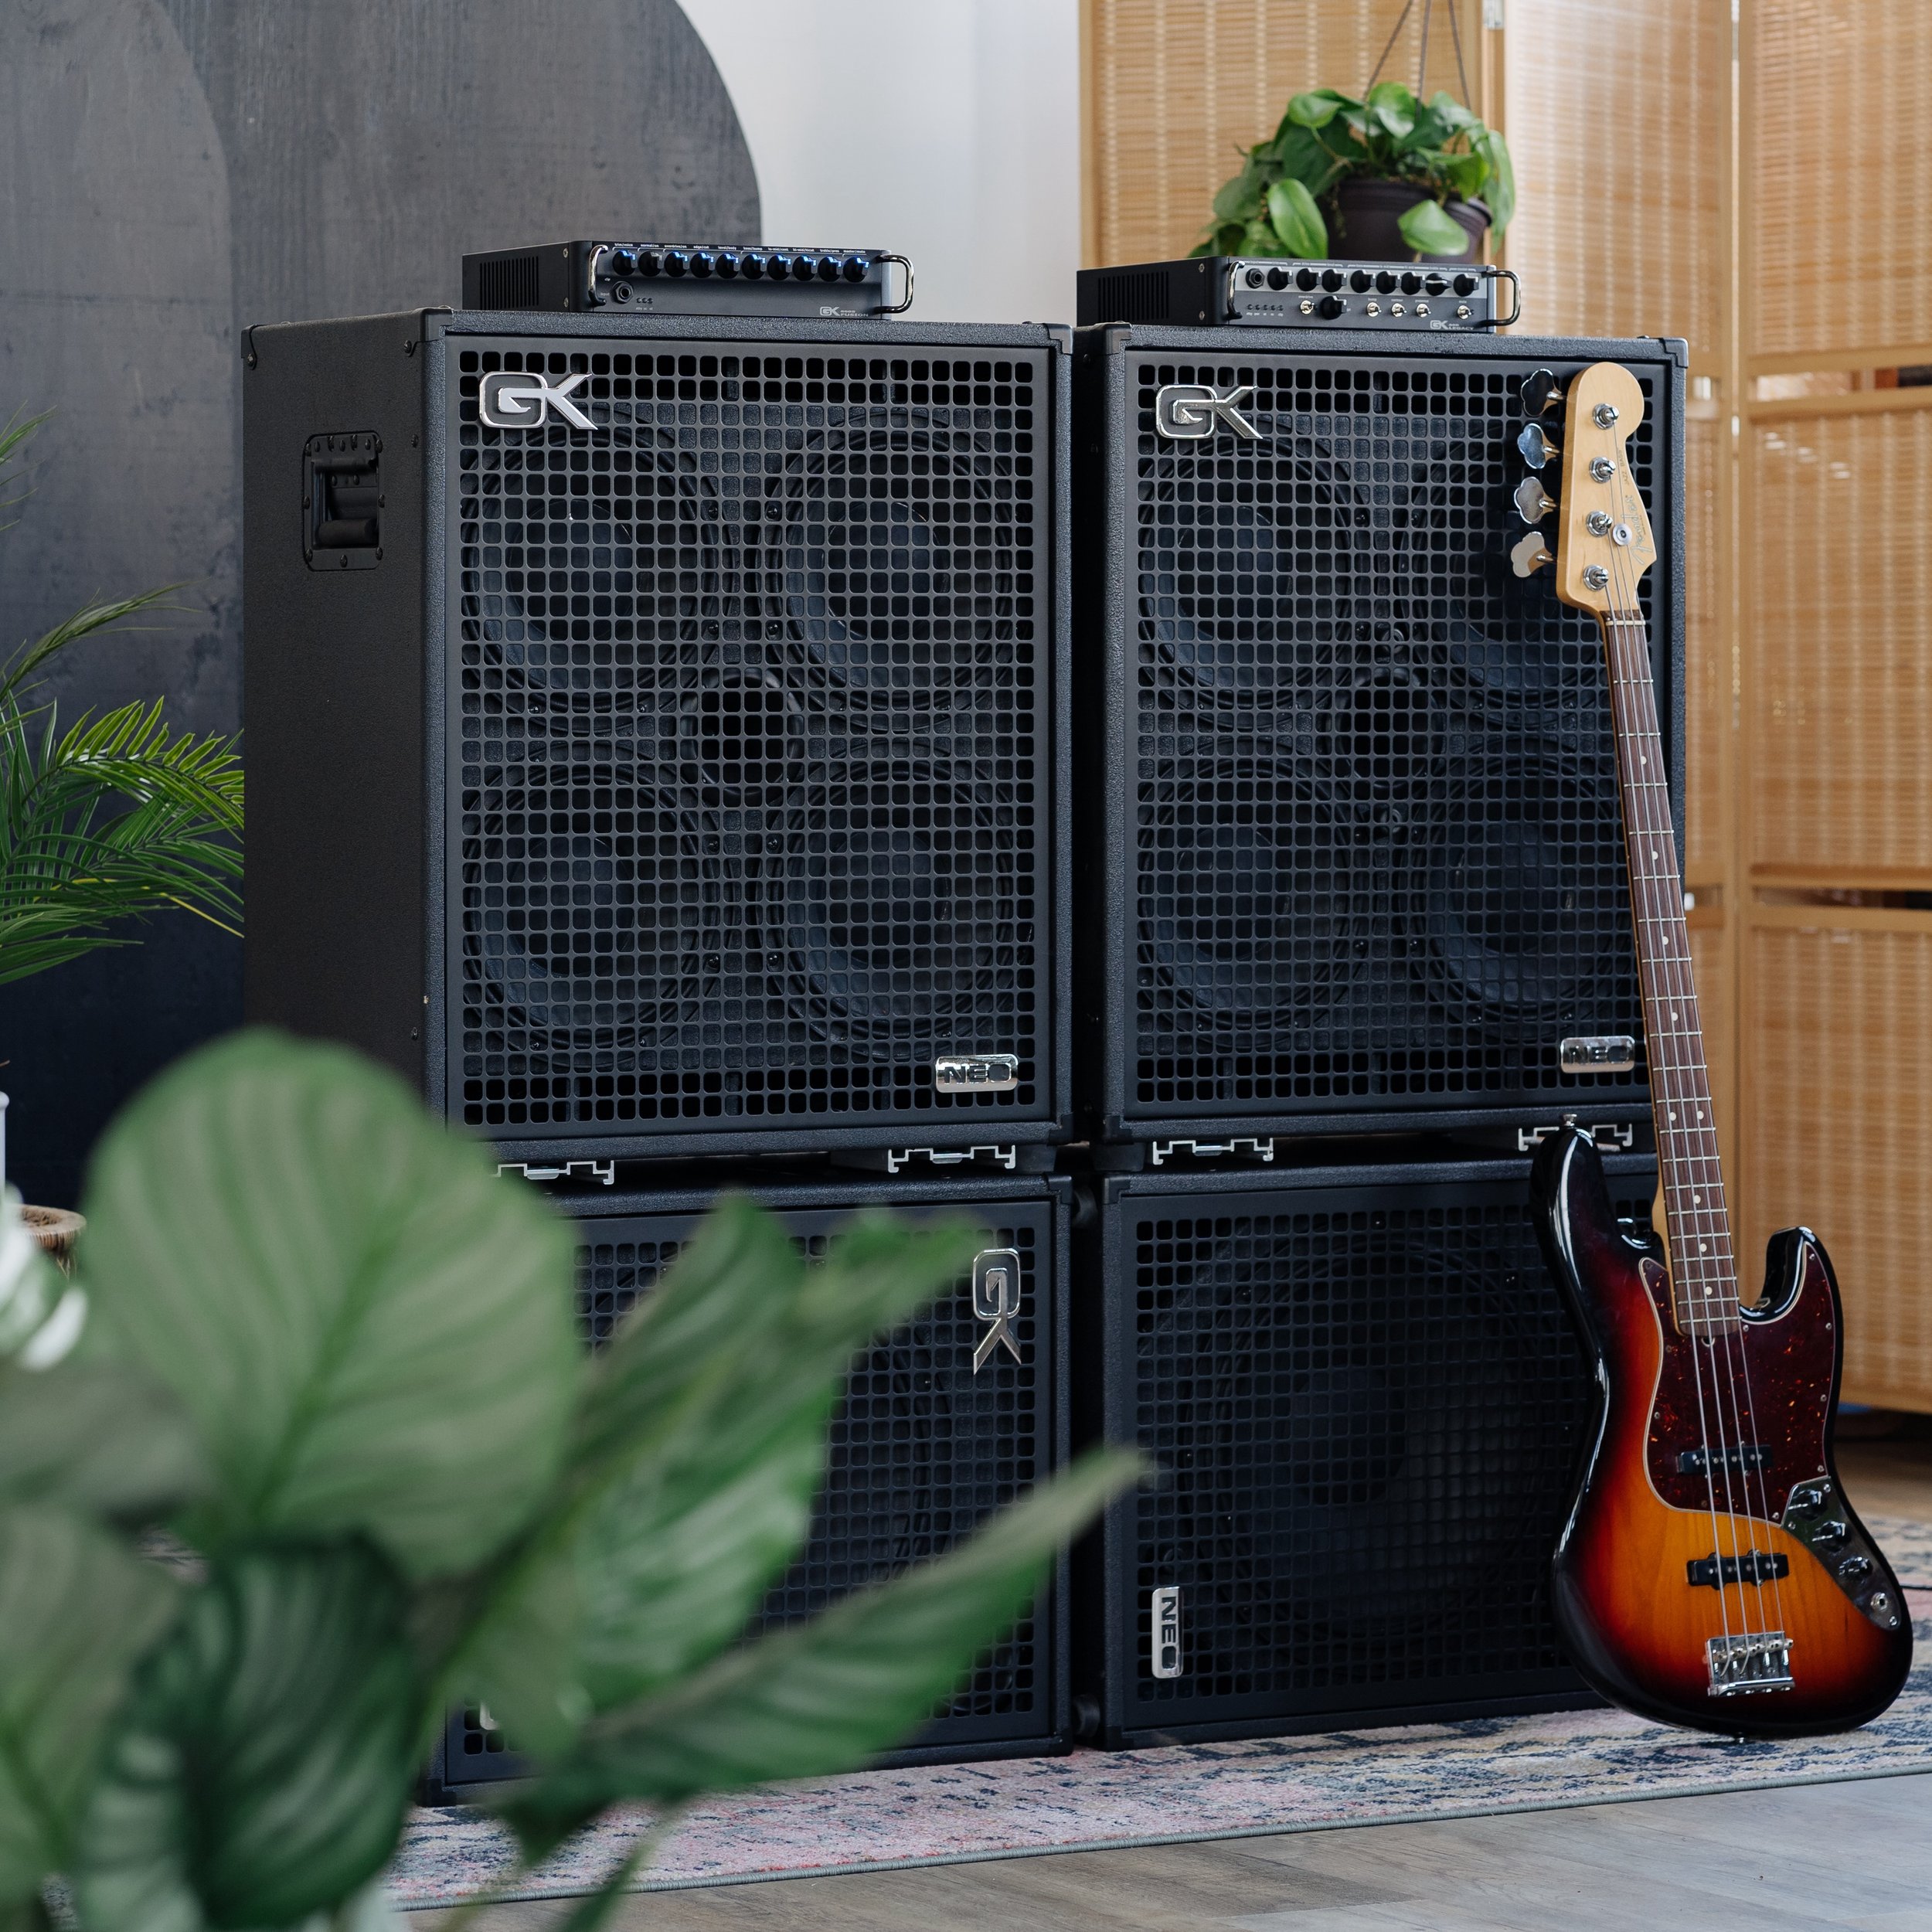 What side would you choose? Fusion S stack or Legacy stack??? #gkallday #gallienkrueger #gkamps